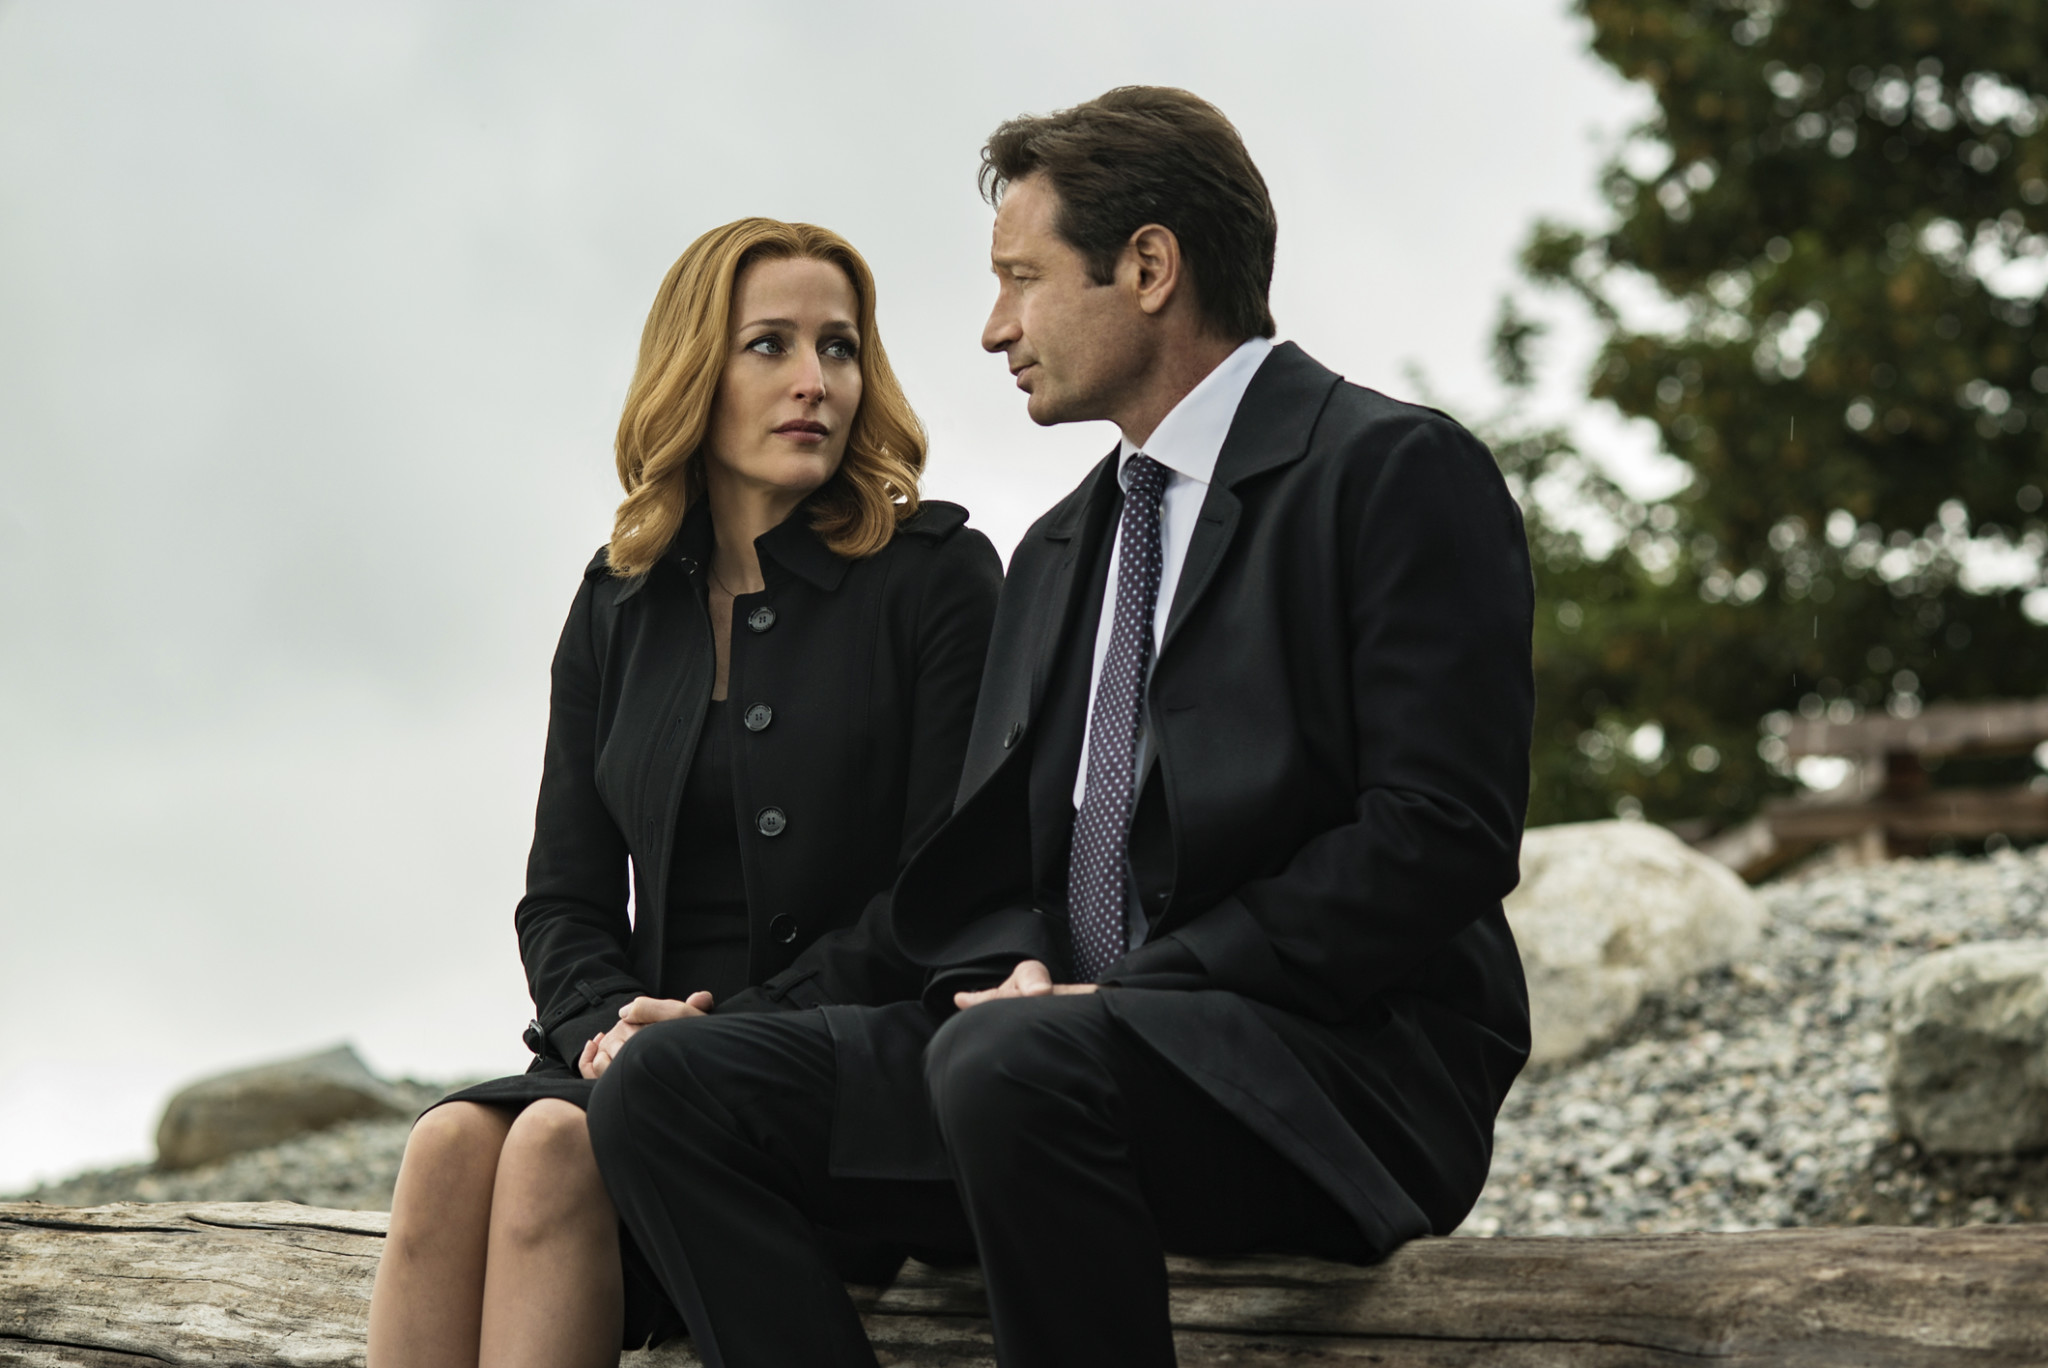 Gillian Anderson and David Duchovny in the 'Home Again' episode of The X-Files